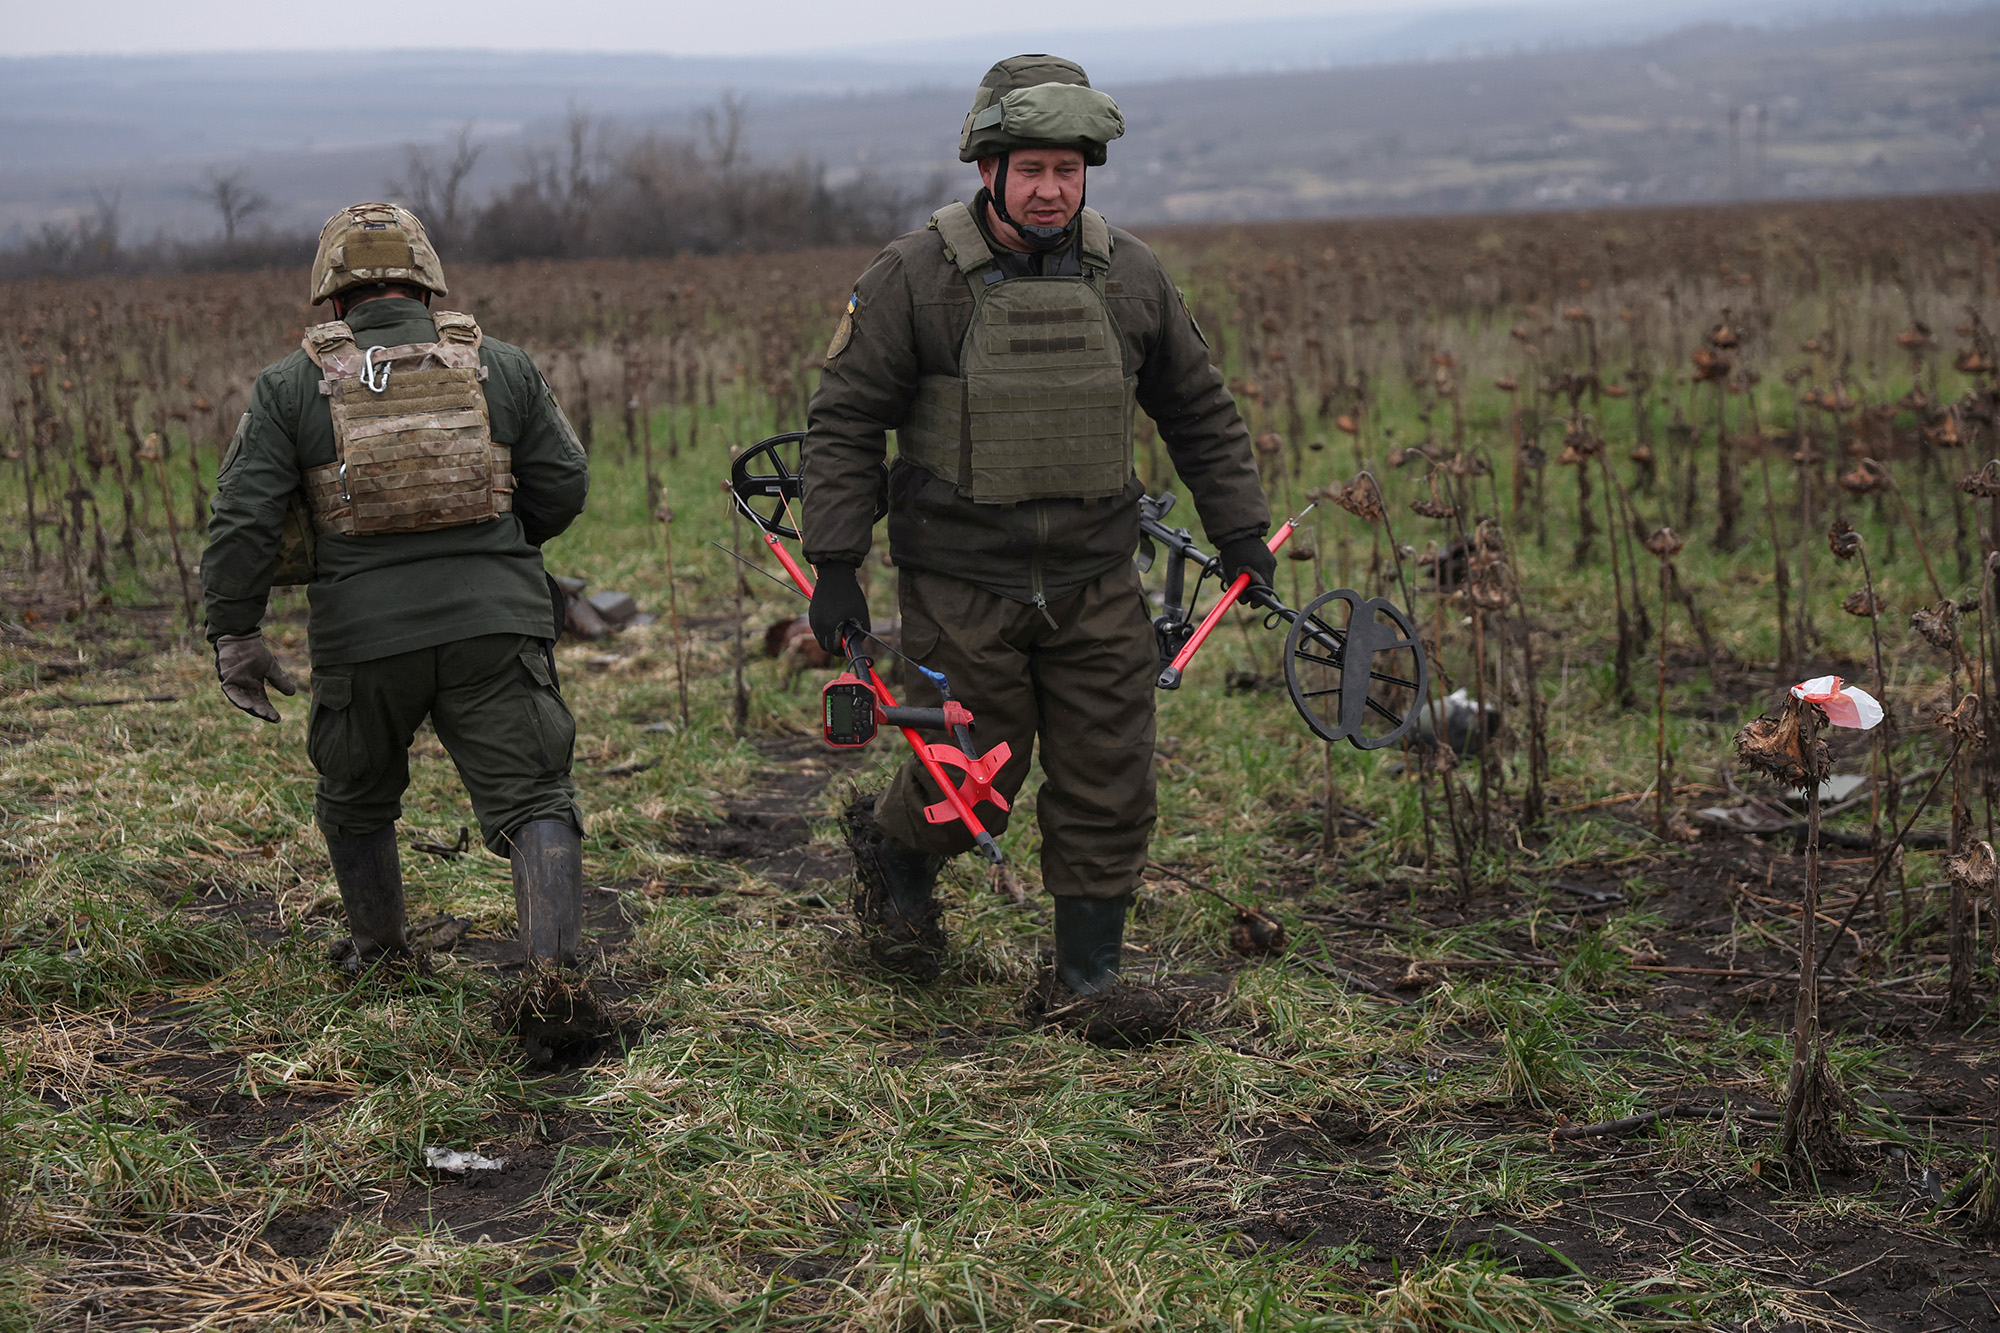 Members of the Ukrainian National guard demining team Battalion Dnipro 1 walk in mine fields in the northern part of the Donetsk region of Ukraine, on December 12.